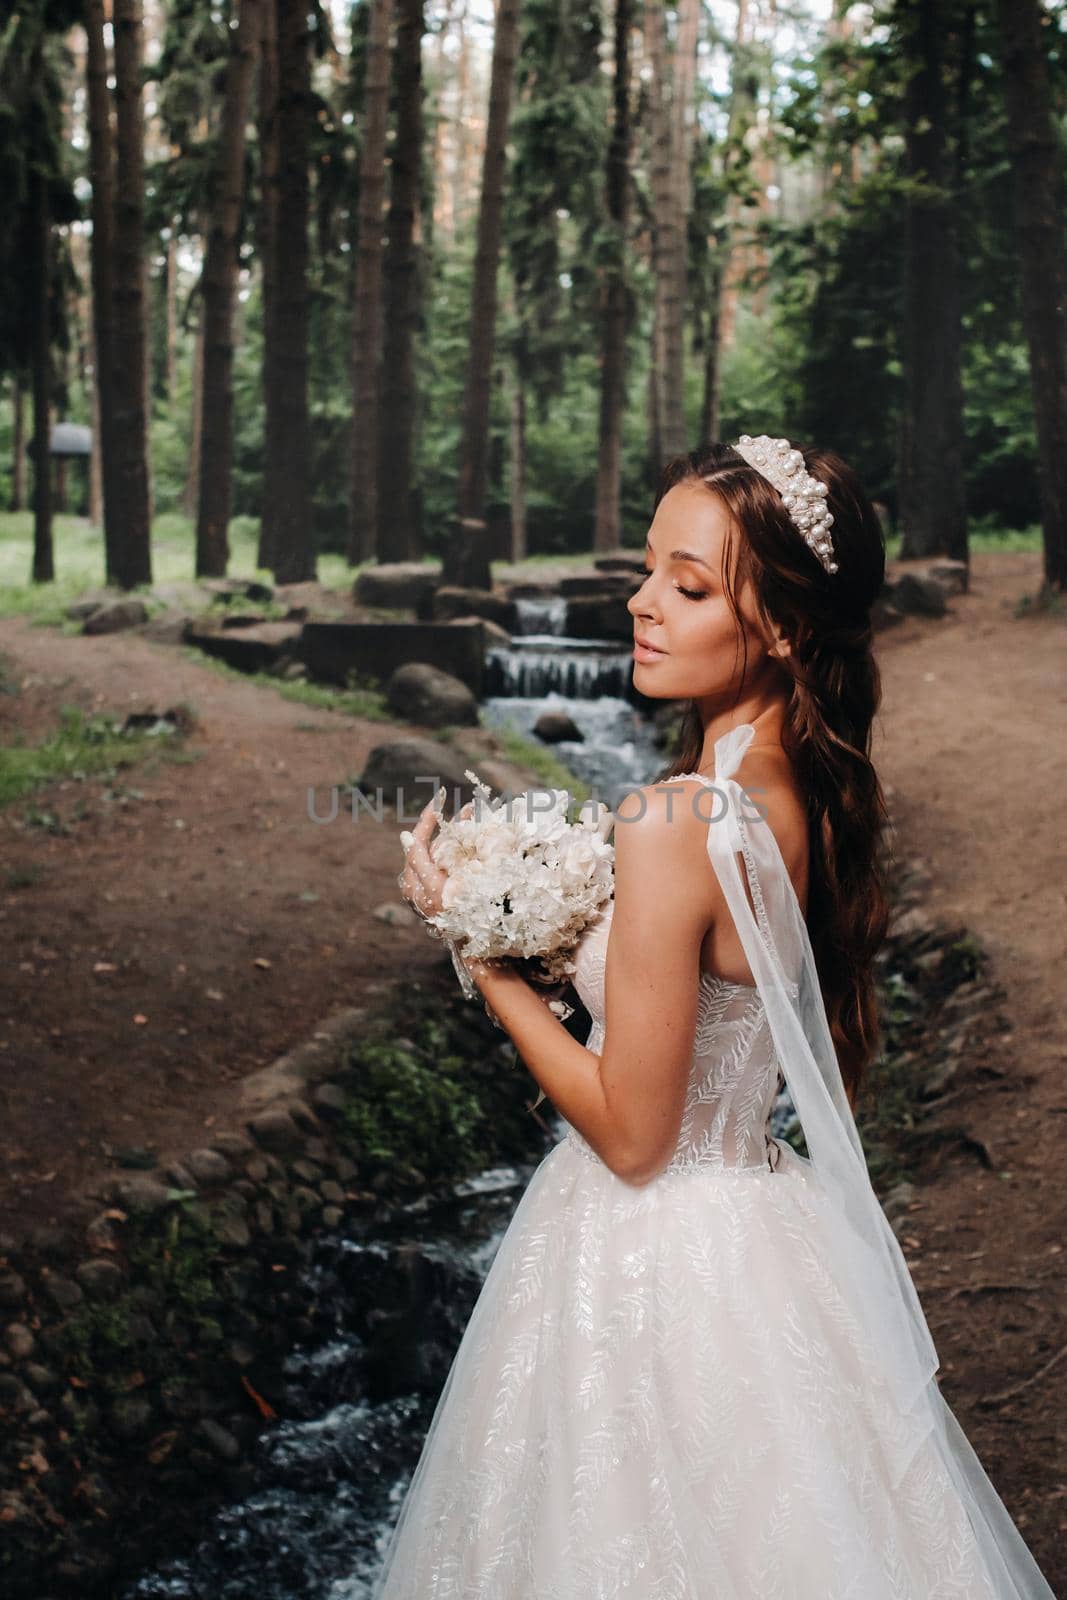 An elegant bride in a white dress and gloves holding a bouquet stands by a stream in the forest, enjoying nature.A model in a wedding dress and gloves in a nature Park.Belarus.